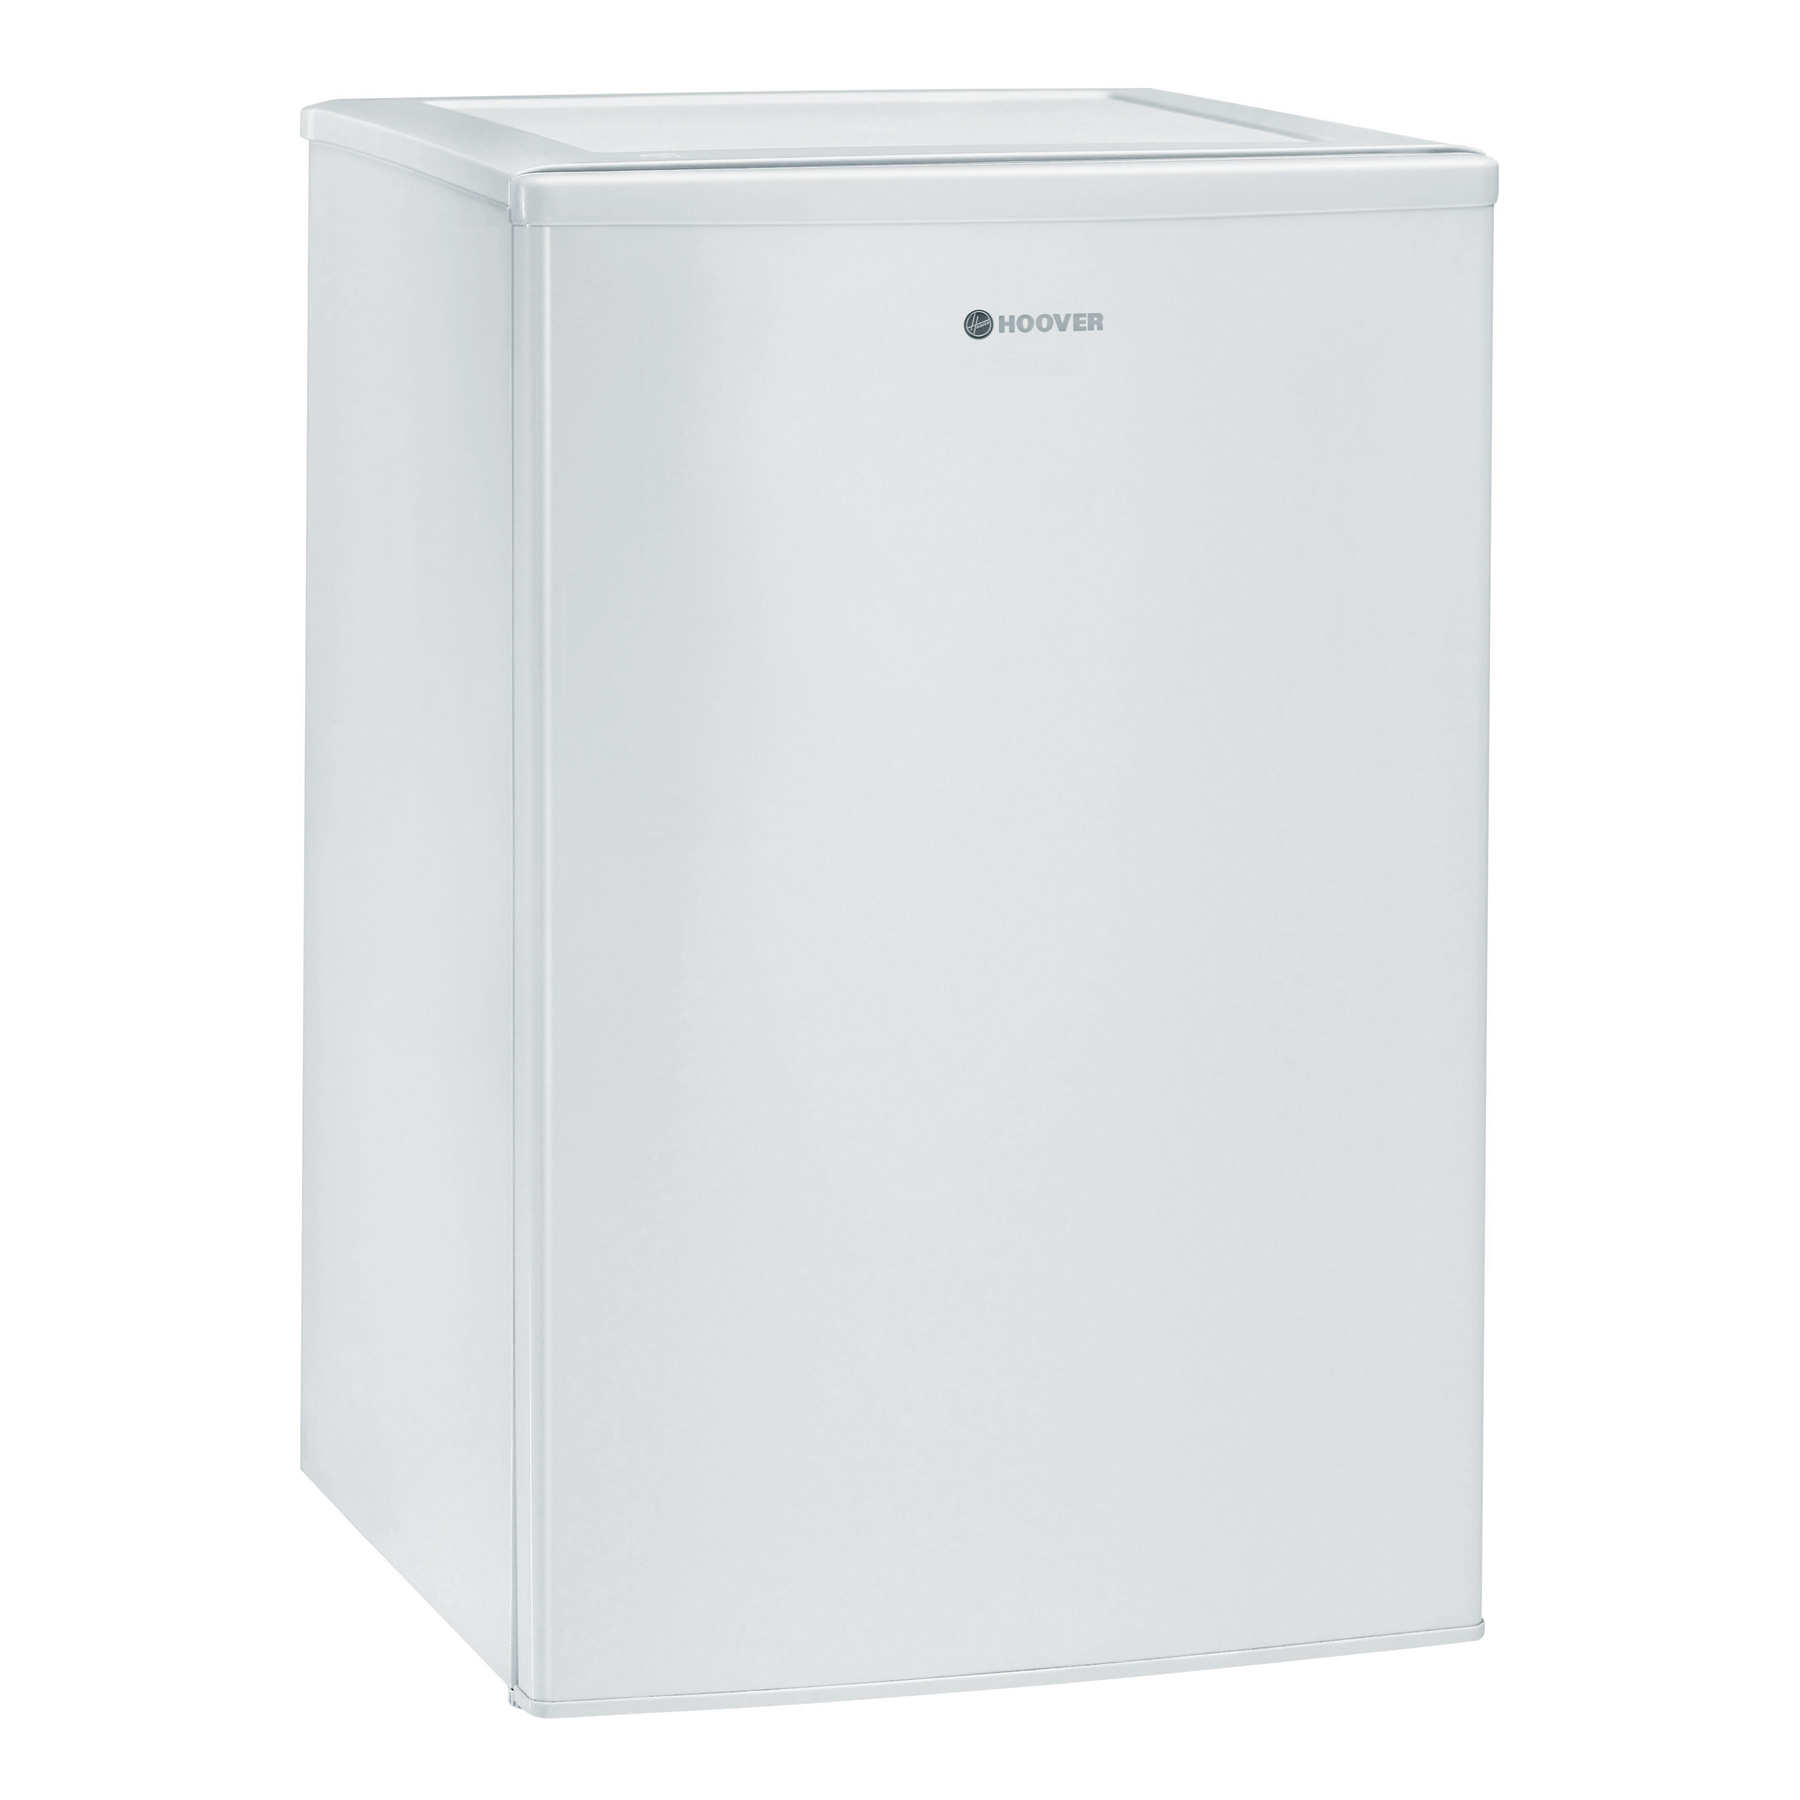 Image of Hoover HFLE54WN 55cm Undercounter Larder Fridge in White F Rated 127L